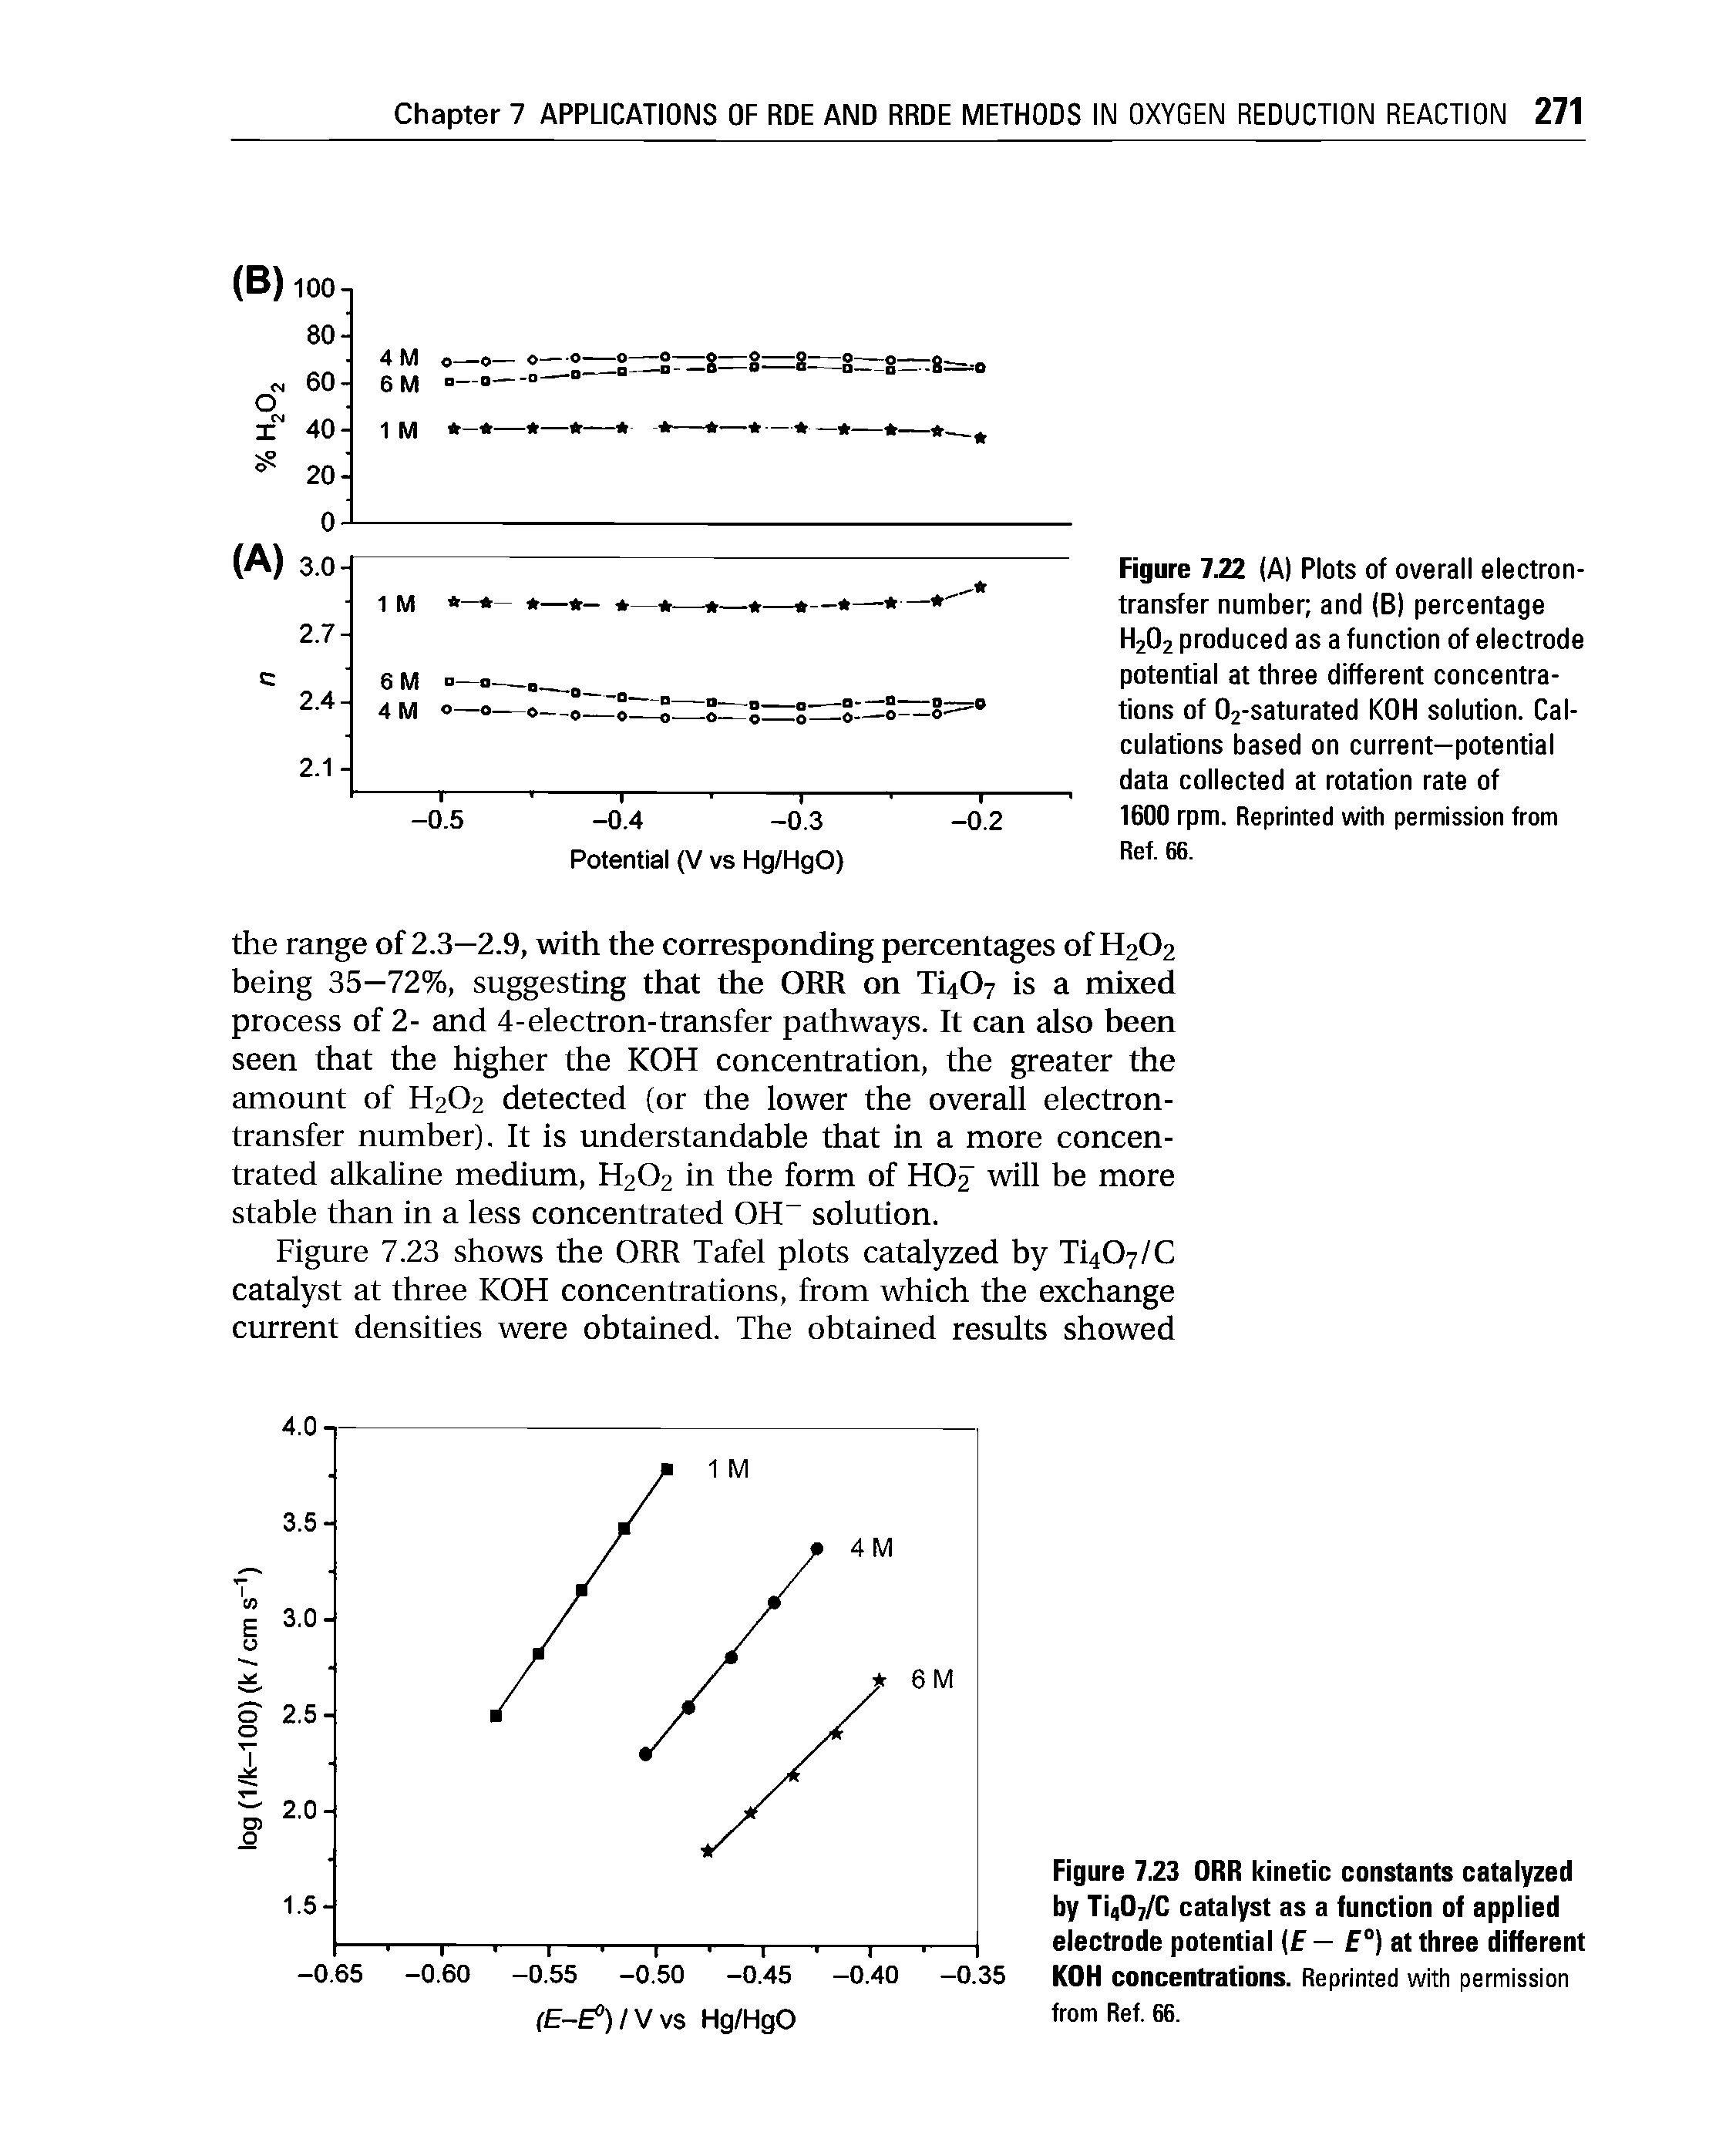 Figure 7.22 (A) Plots of overall electron-transfer number and (B) percentage H2O2 produced as a function of electrode potential at three different concentrations of 02-saturated KOH solution. Calculations based on current-potential data collected at rotation rate of 1600 rpm. Reprinted with permission from Ref. 66.